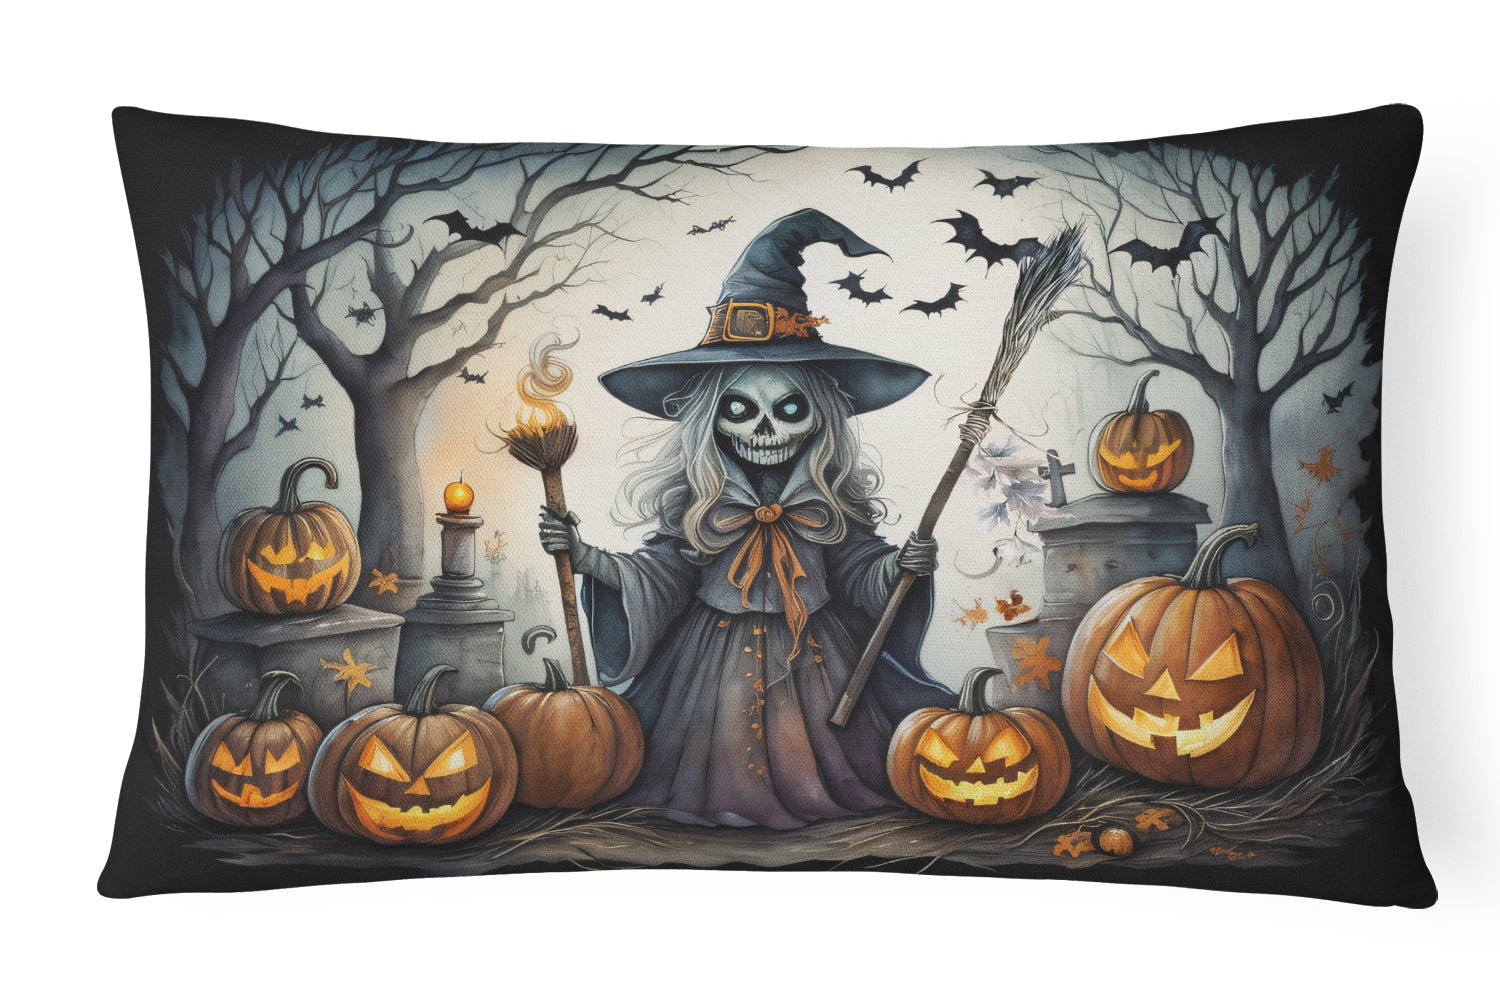 Buy this Witch Spooky Halloween Fabric Decorative Pillow